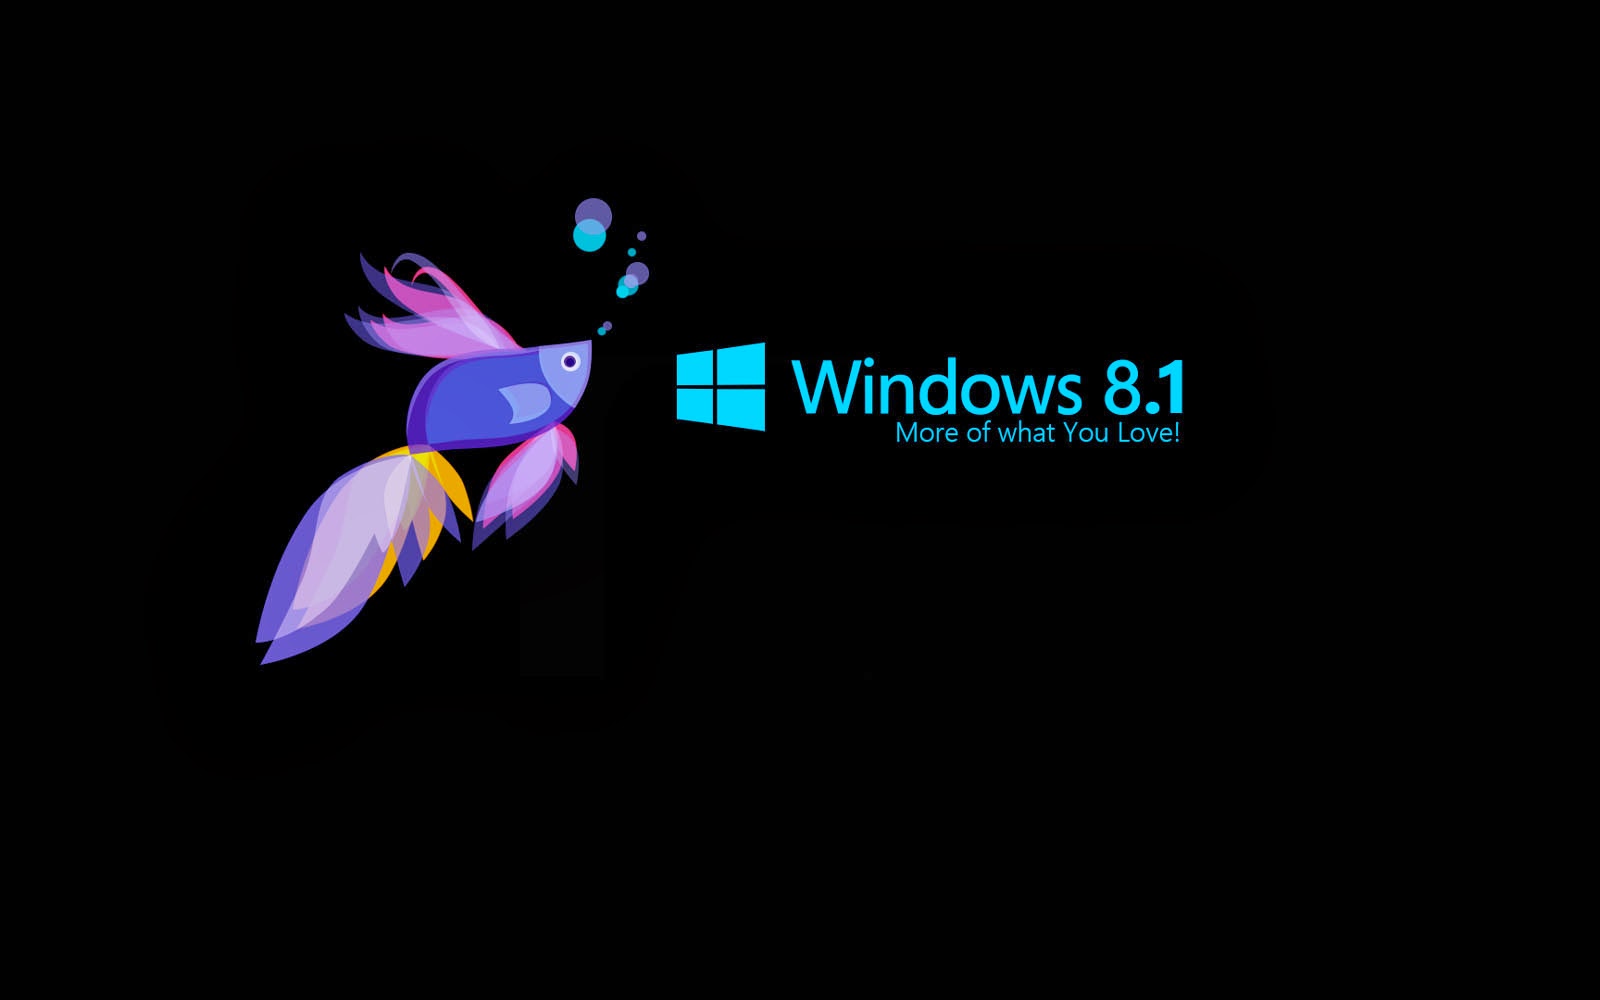 Windows 8.1 Wallpapers, Pictures, Images
 Full Hd Wallpapers For Windows 8 1920x1080